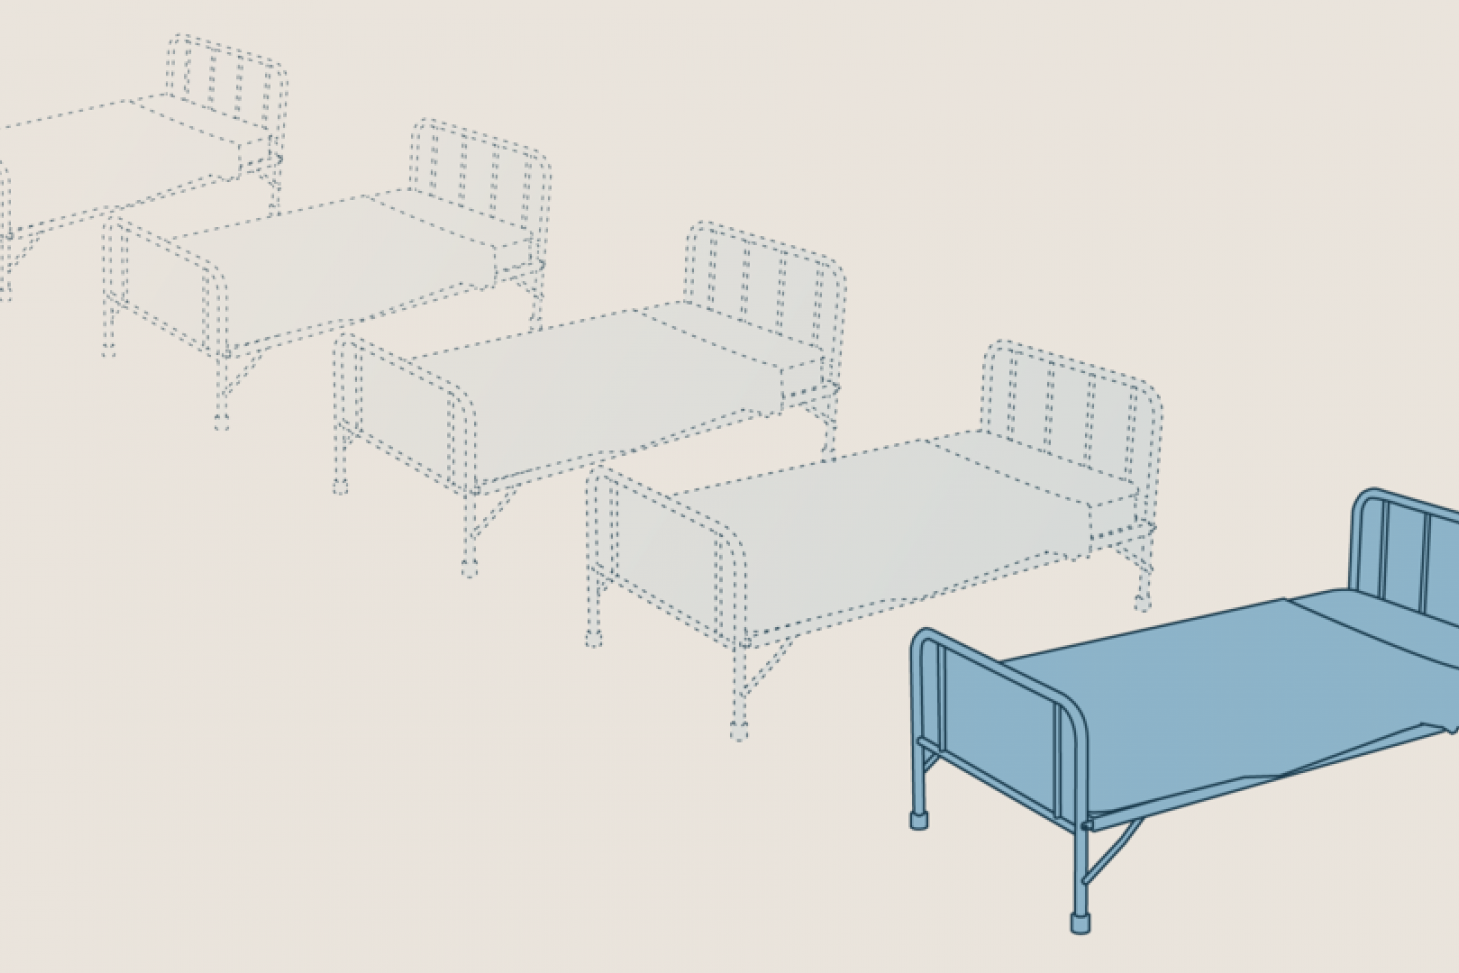 Drawings of hospital beds